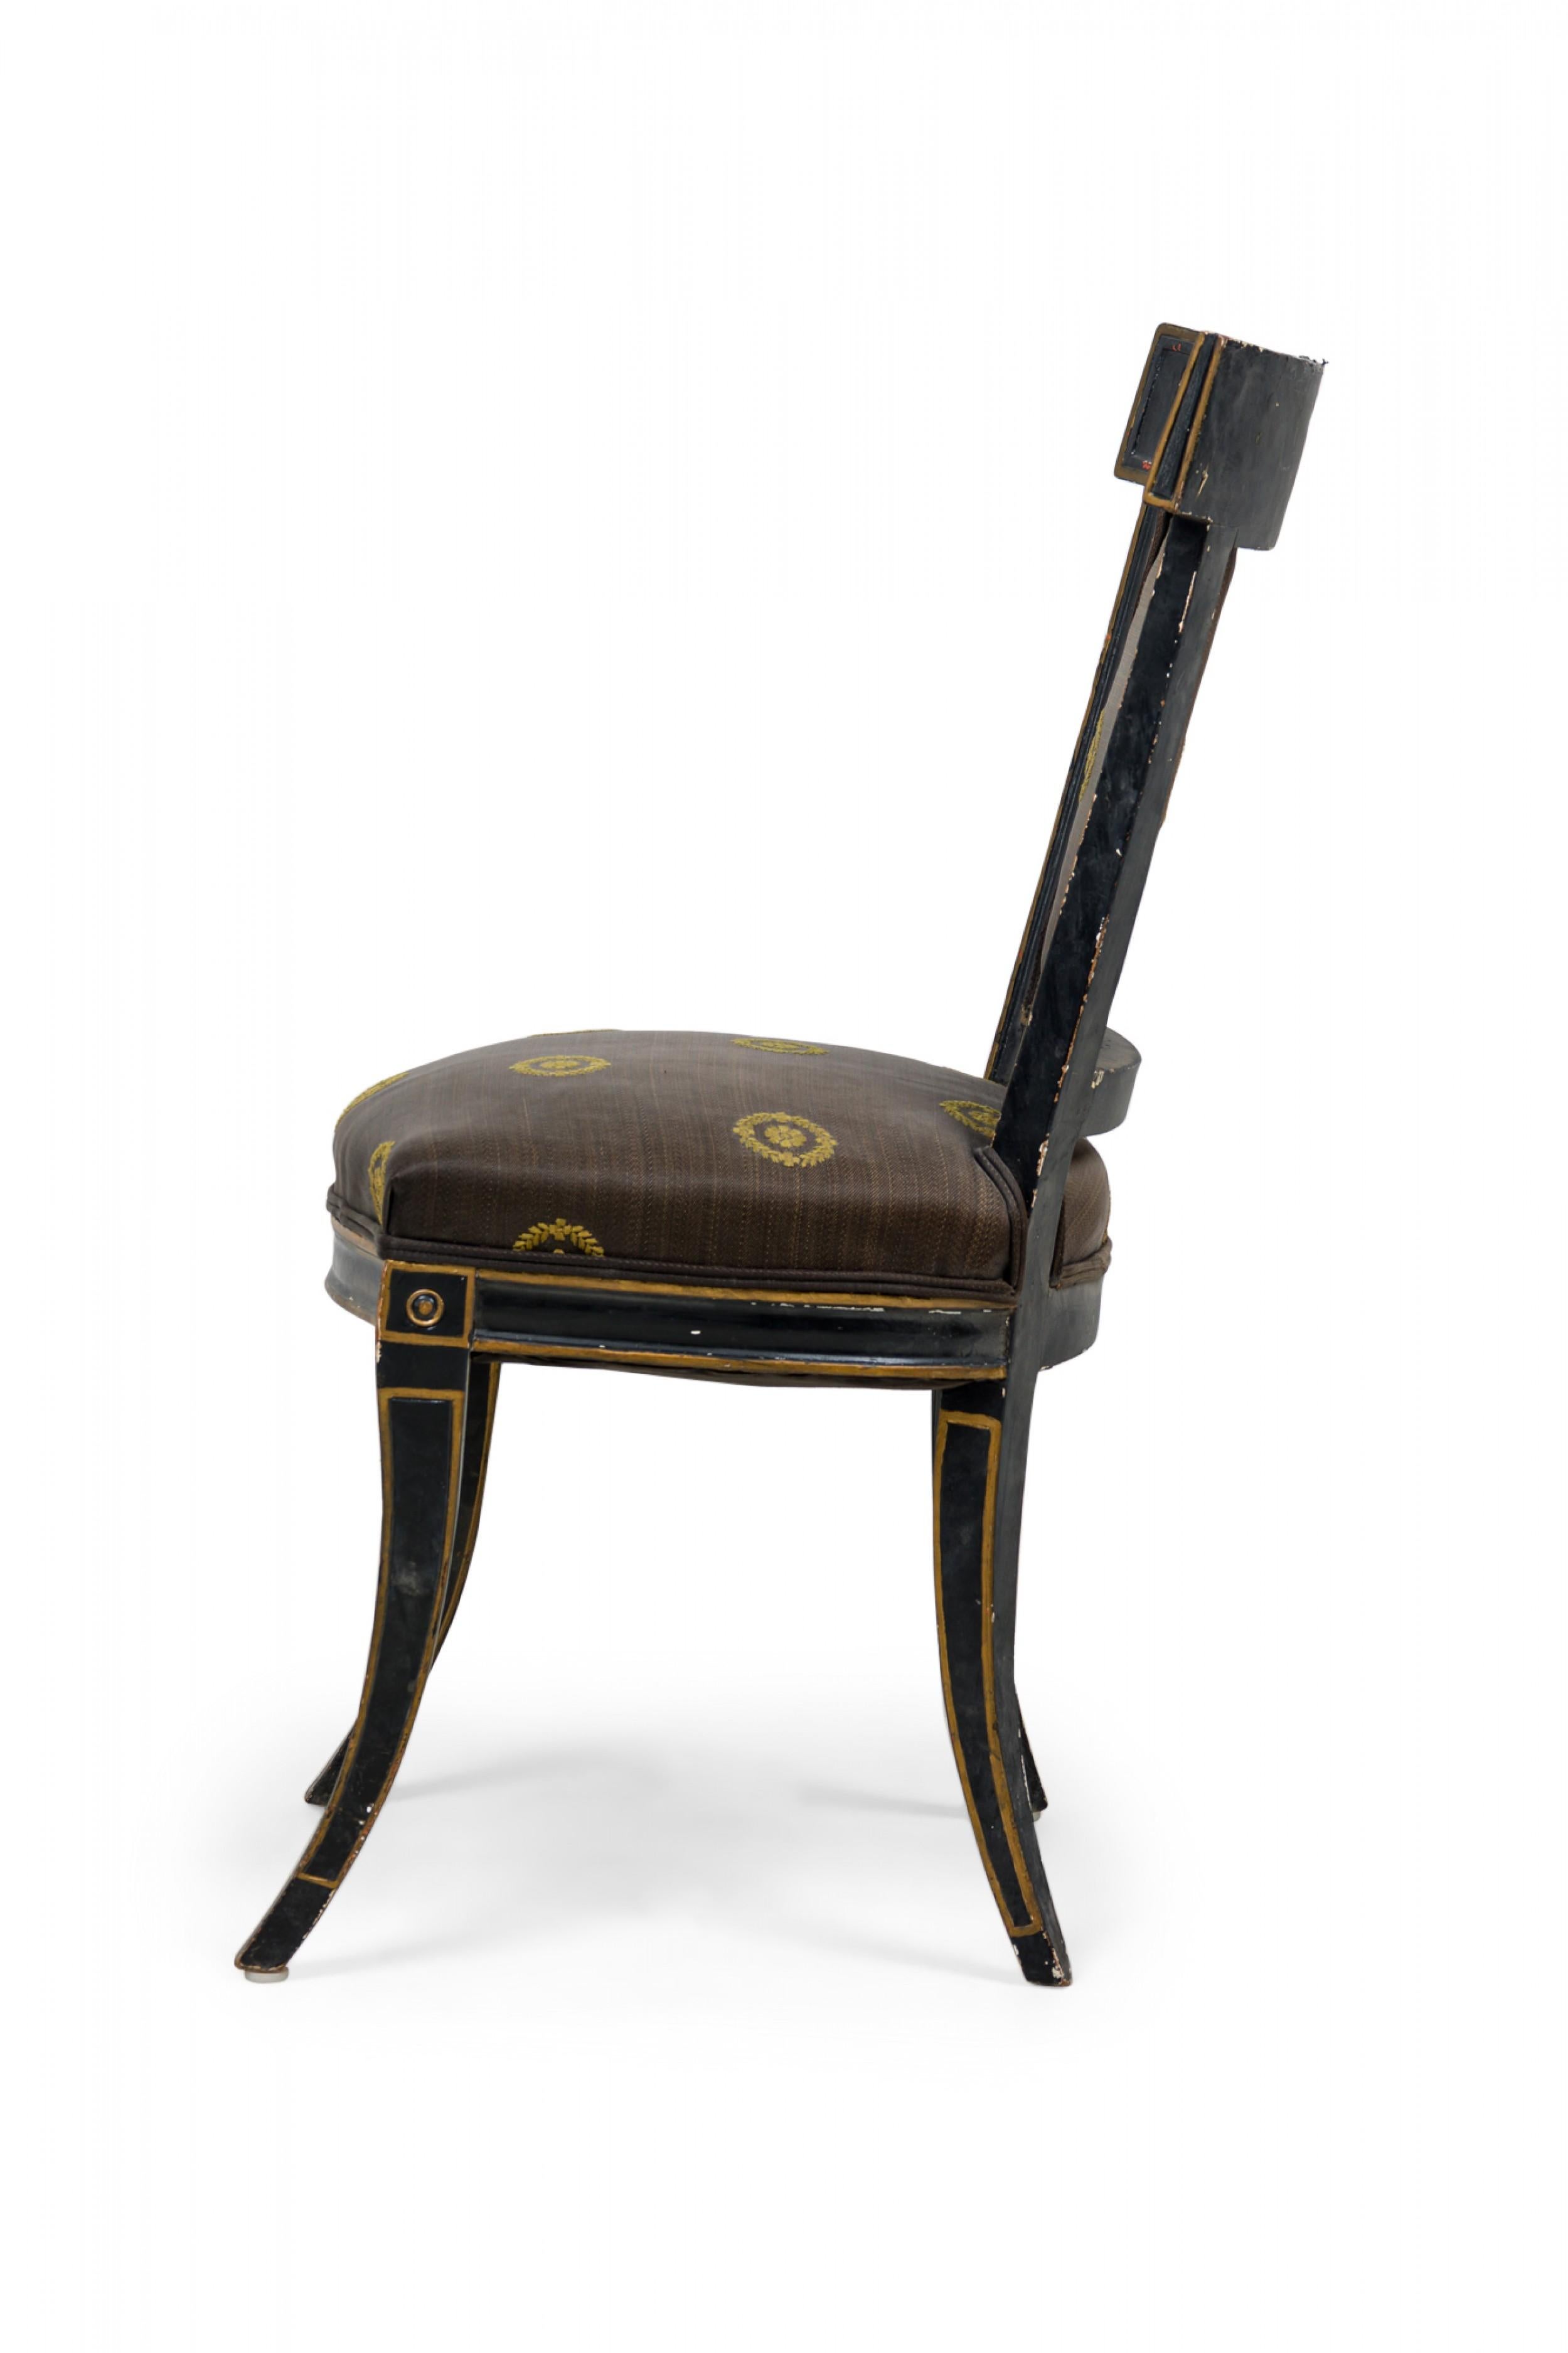 Pair of Italian Neo-Classic Black Painted and Gilt Upholstered Dining Side Chair In Good Condition For Sale In New York, NY